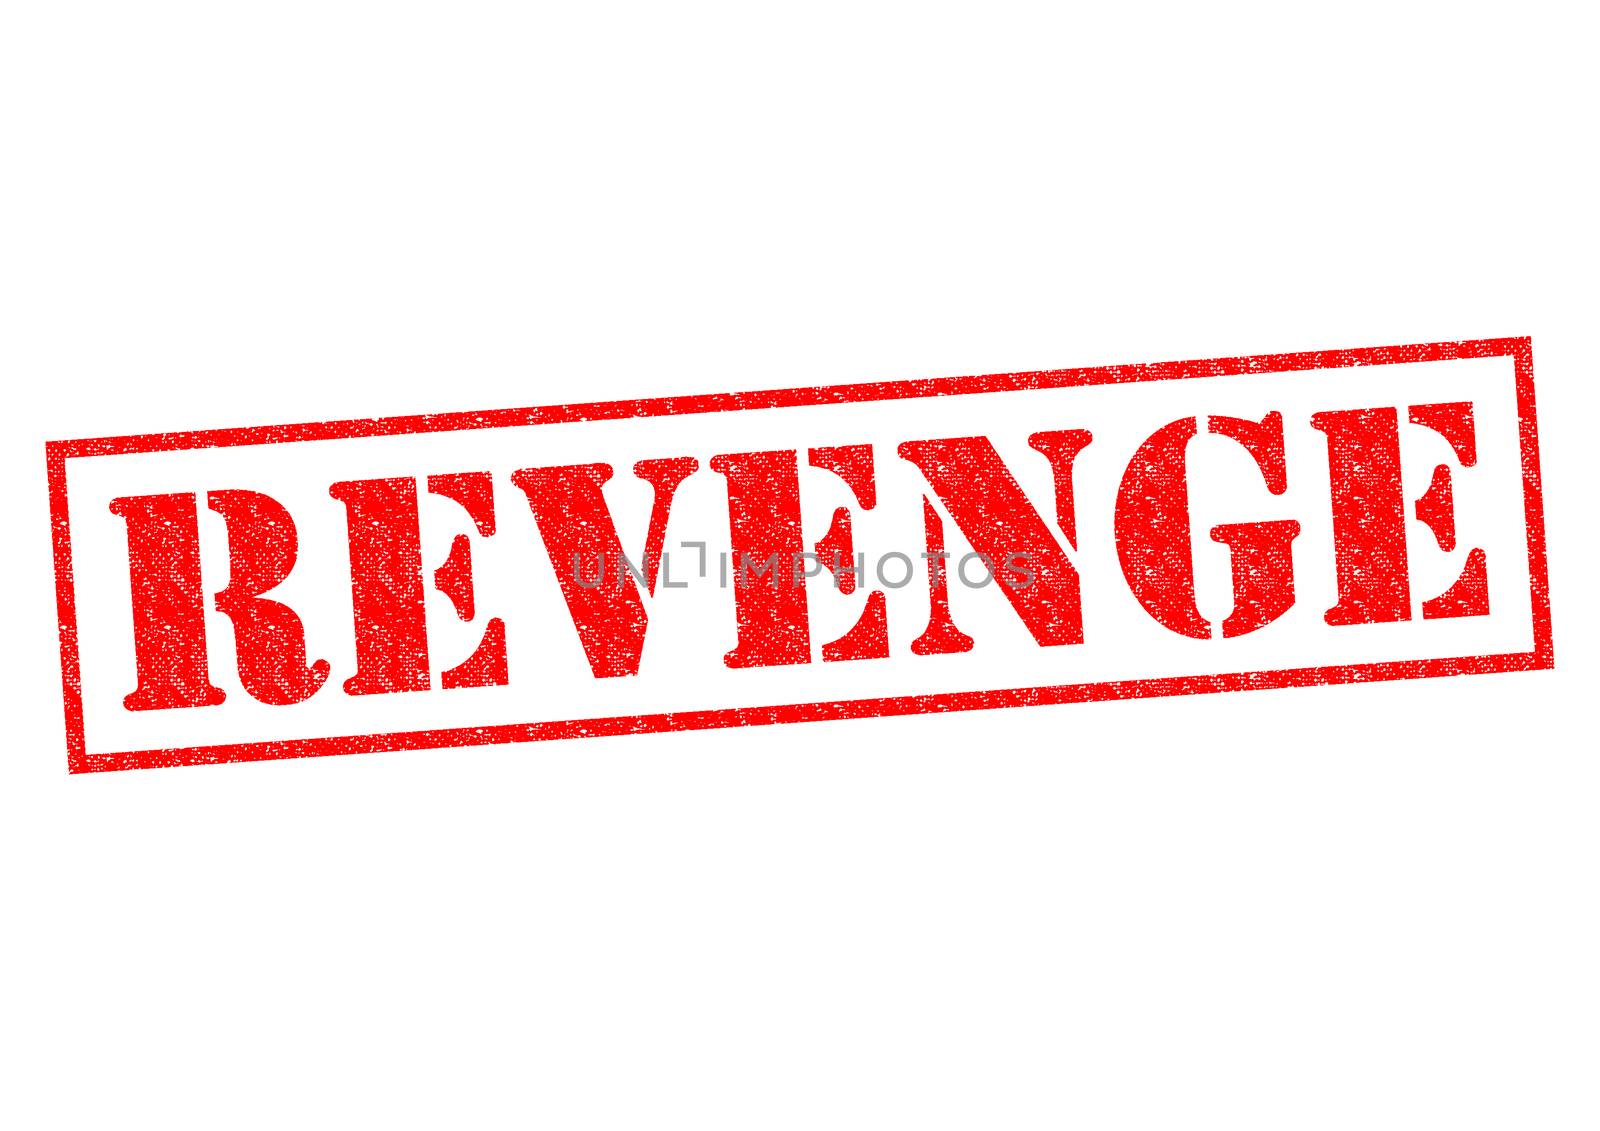 REVENGE red Rubber Stamp over a white background.